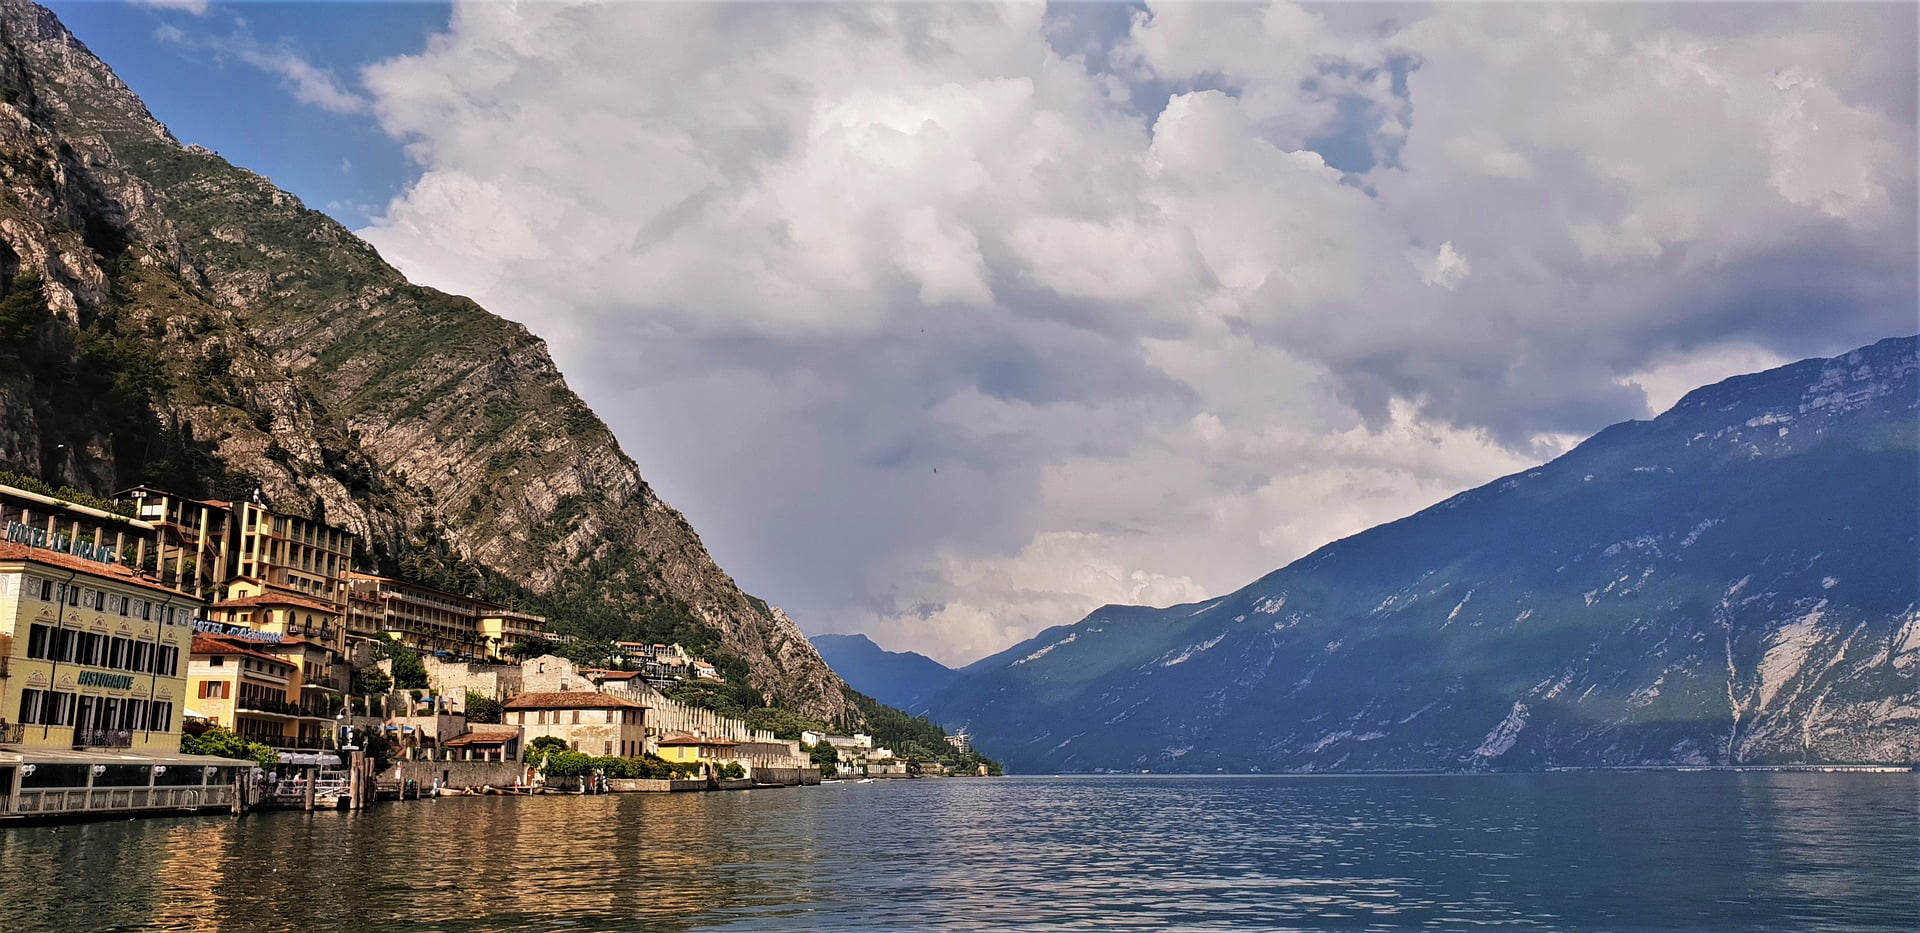 Things to do in Limone sul Garda